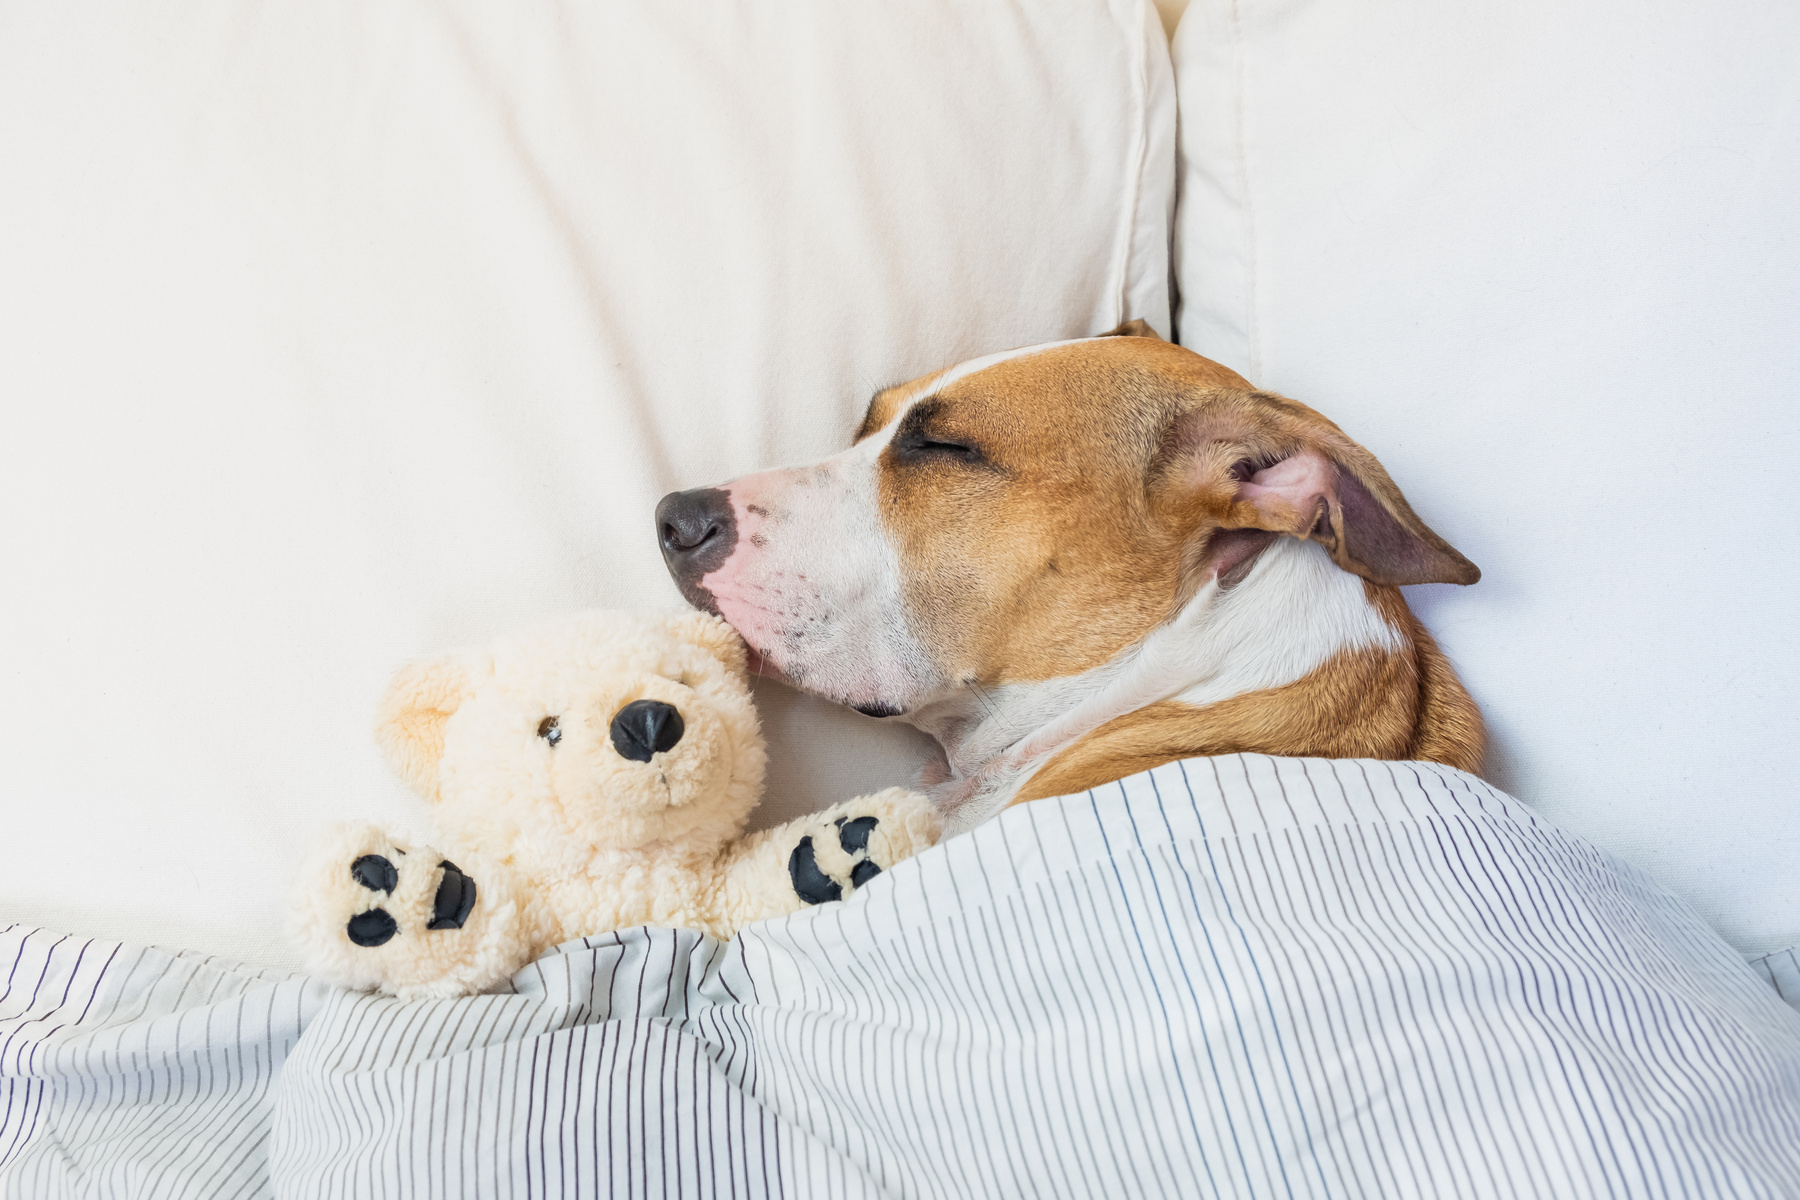 Dog Sleeping on Bed with Stuffed Bear and Blanket